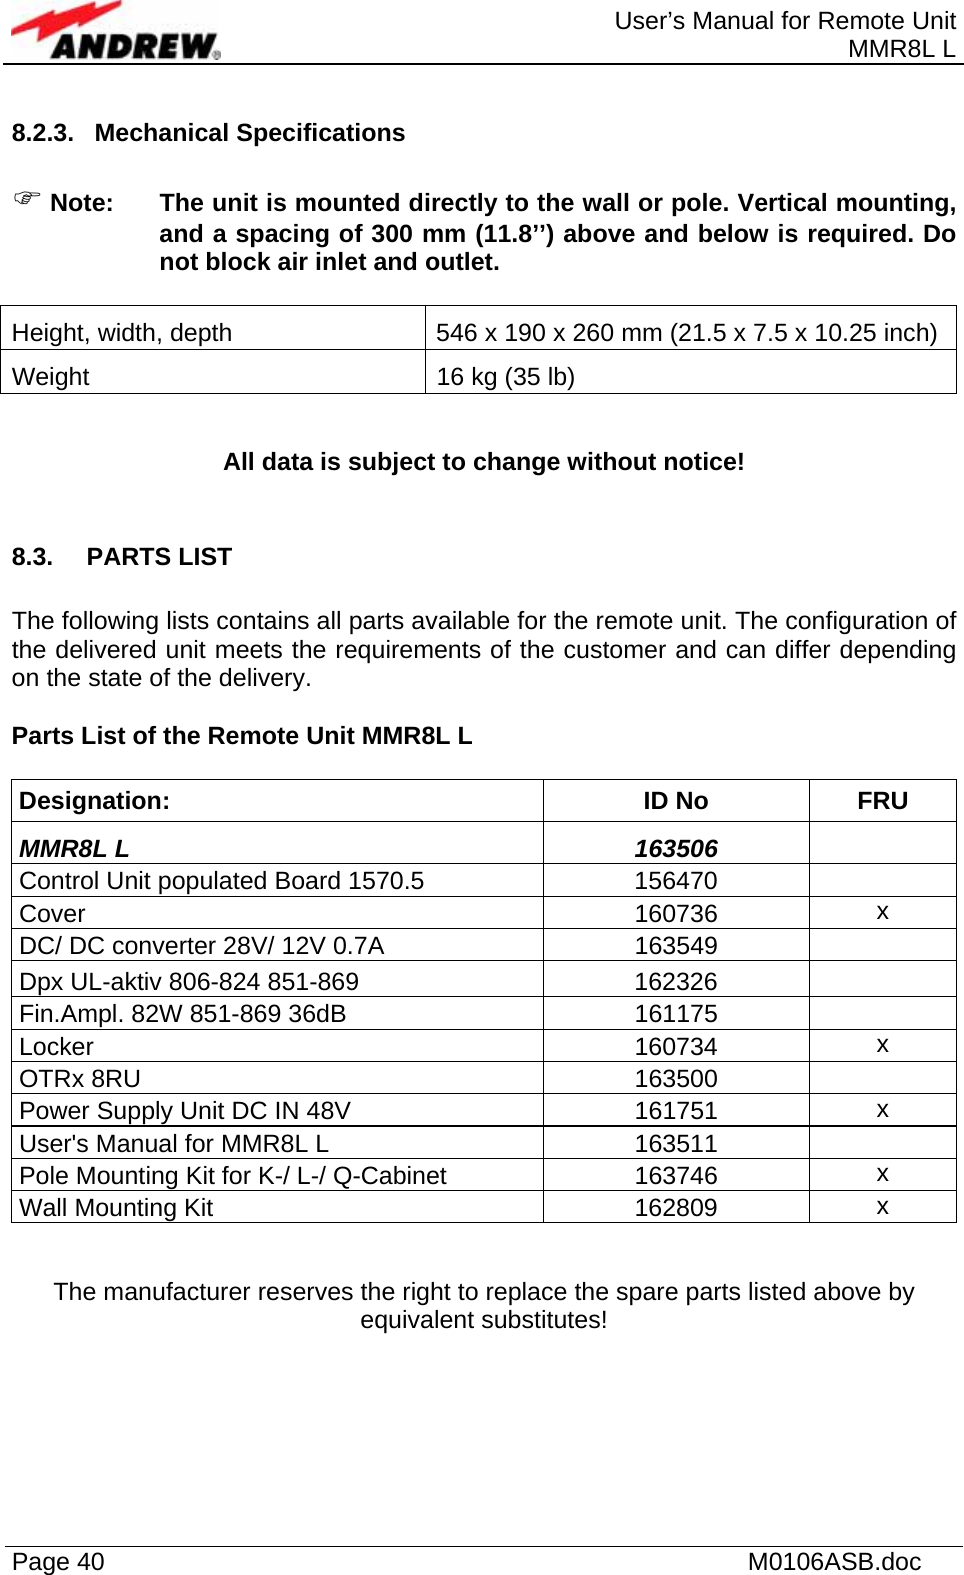  User’s Manual for Remote Unit MMR8L L Page 40    M0106ASB.doc  8.2.3. Mechanical Specifications  ) Note:  The unit is mounted directly to the wall or pole. Vertical mounting, and a spacing of 300 mm (11.8’’) above and below is required. Do not block air inlet and outlet.  Height, width, depth  546 x 190 x 260 mm (21.5 x 7.5 x 10.25 inch) Weight  16 kg (35 lb)  All data is subject to change without notice!  8.3. PARTS LIST  The following lists contains all parts available for the remote unit. The configuration of the delivered unit meets the requirements of the customer and can differ depending on the state of the delivery.  Parts List of the Remote Unit MMR8L L  Designation: ID No FRU MMR8L L  163506   Control Unit populated Board 1570.5  156470   Cover 160736 x DC/ DC converter 28V/ 12V 0.7A  163549   Dpx UL-aktiv 806-824 851-869  162326   Fin.Ampl. 82W 851-869 36dB  161175   Locker 160734 x OTRx 8RU  163500   Power Supply Unit DC IN 48V  161751  x User&apos;s Manual for MMR8L L  163511   Pole Mounting Kit for K-/ L-/ Q-Cabinet  163746  x Wall Mounting Kit  162809  x  The manufacturer reserves the right to replace the spare parts listed above by equivalent substitutes!   